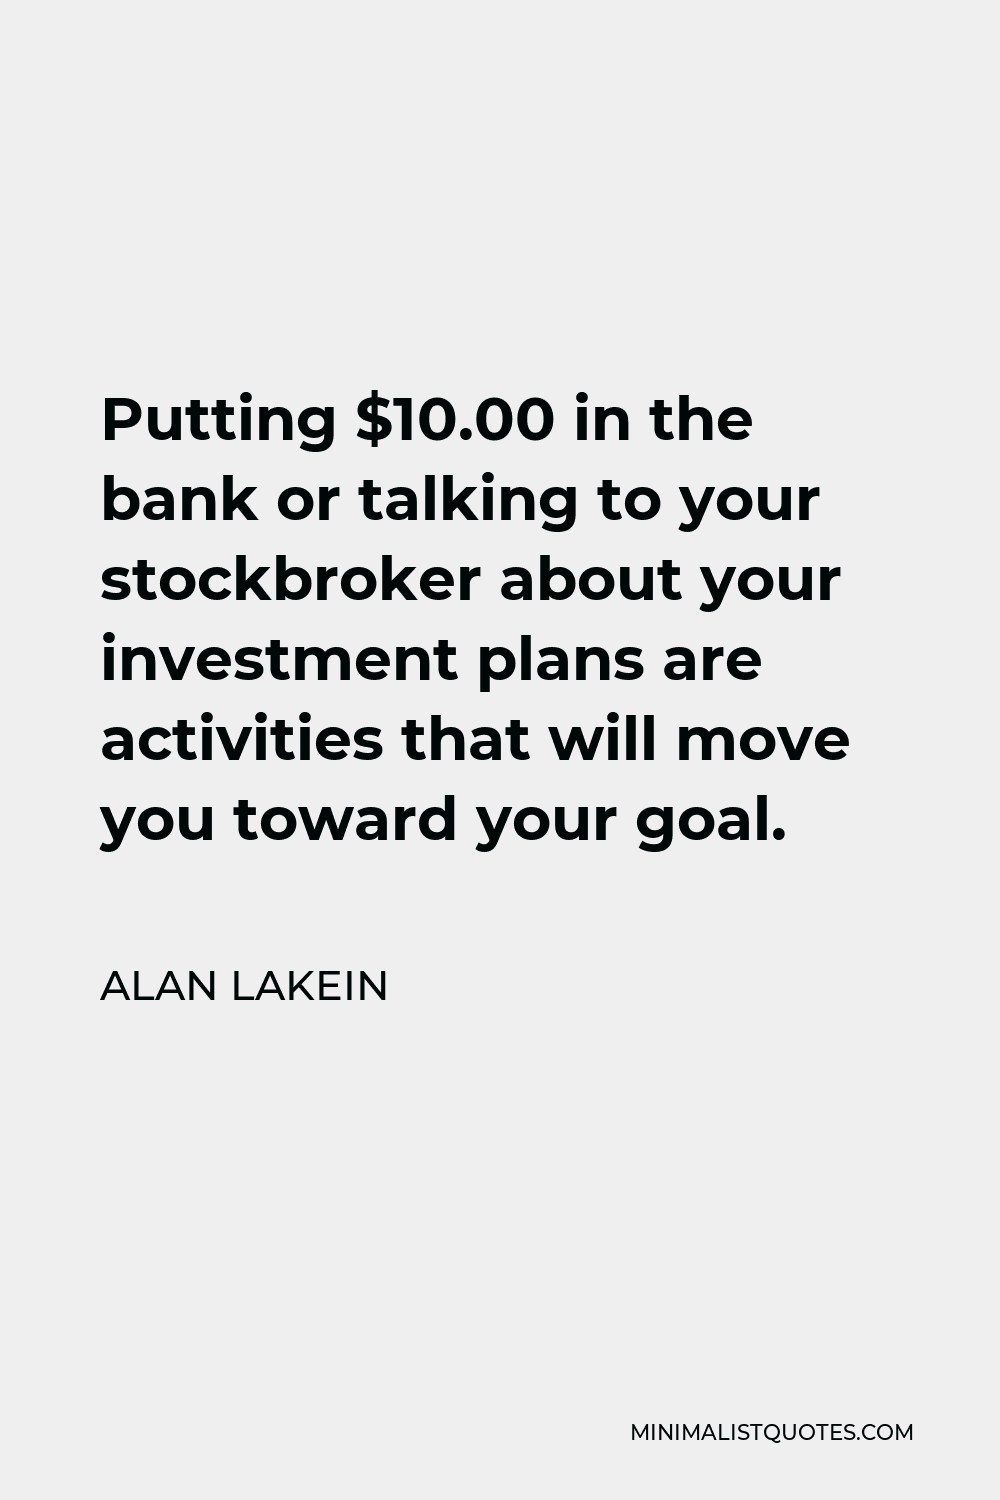 Alan Lakein Quote - Putting $10.00 in the bank or talking to your stockbroker about your investment plans are activities that will move you toward your goal.